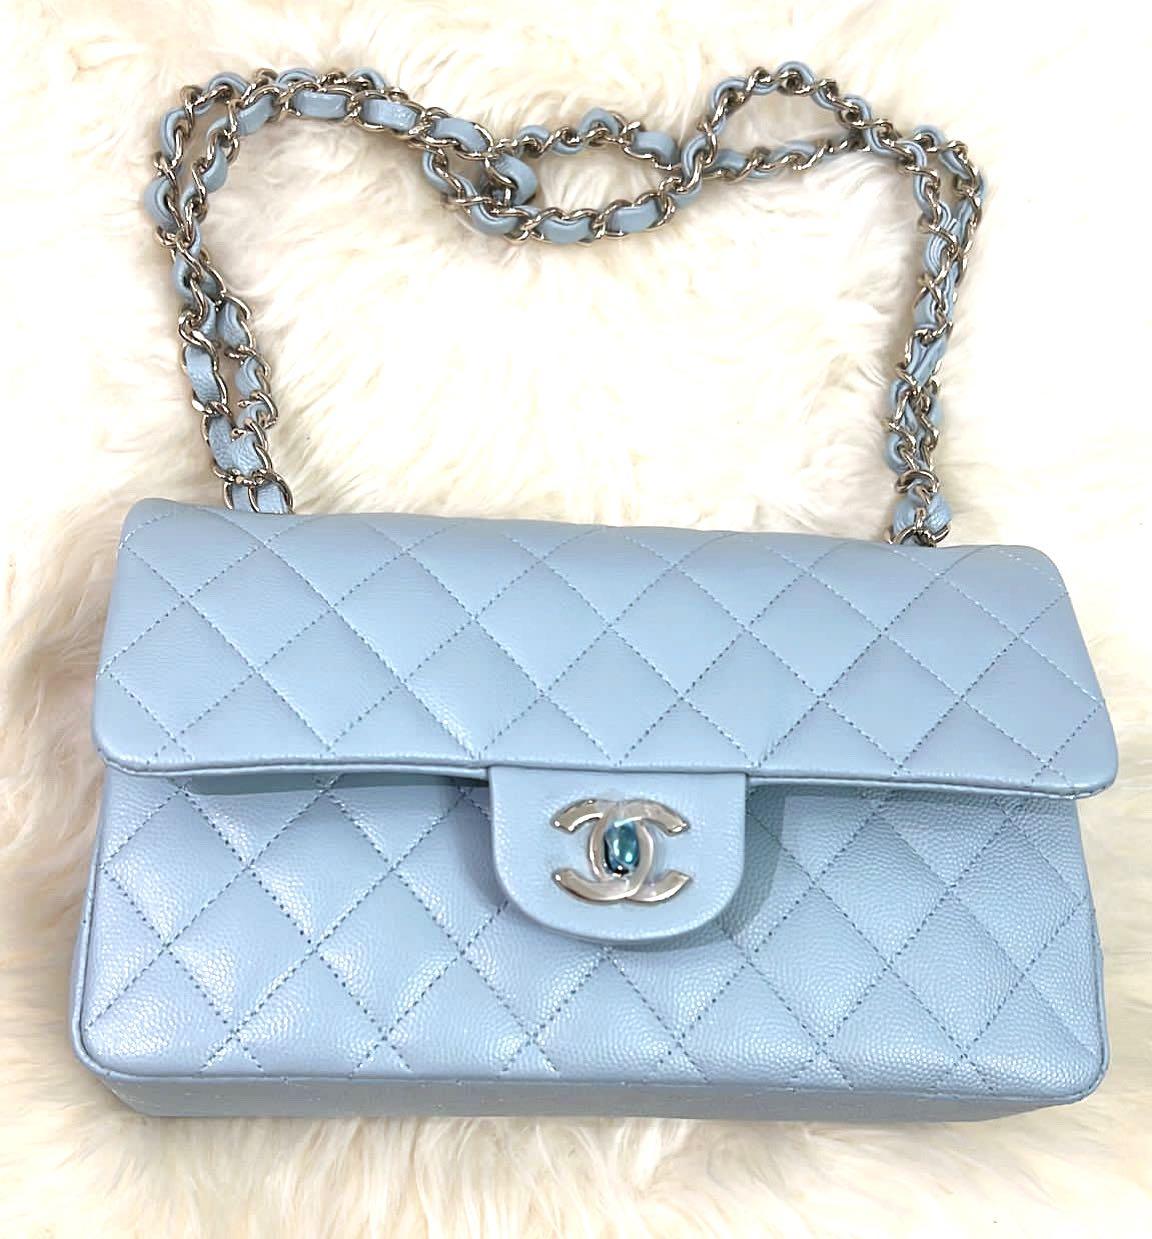 CHANEL Lambskin Quilted Medium Chanel 19 Flap Light Blue 955036   FASHIONPHILE